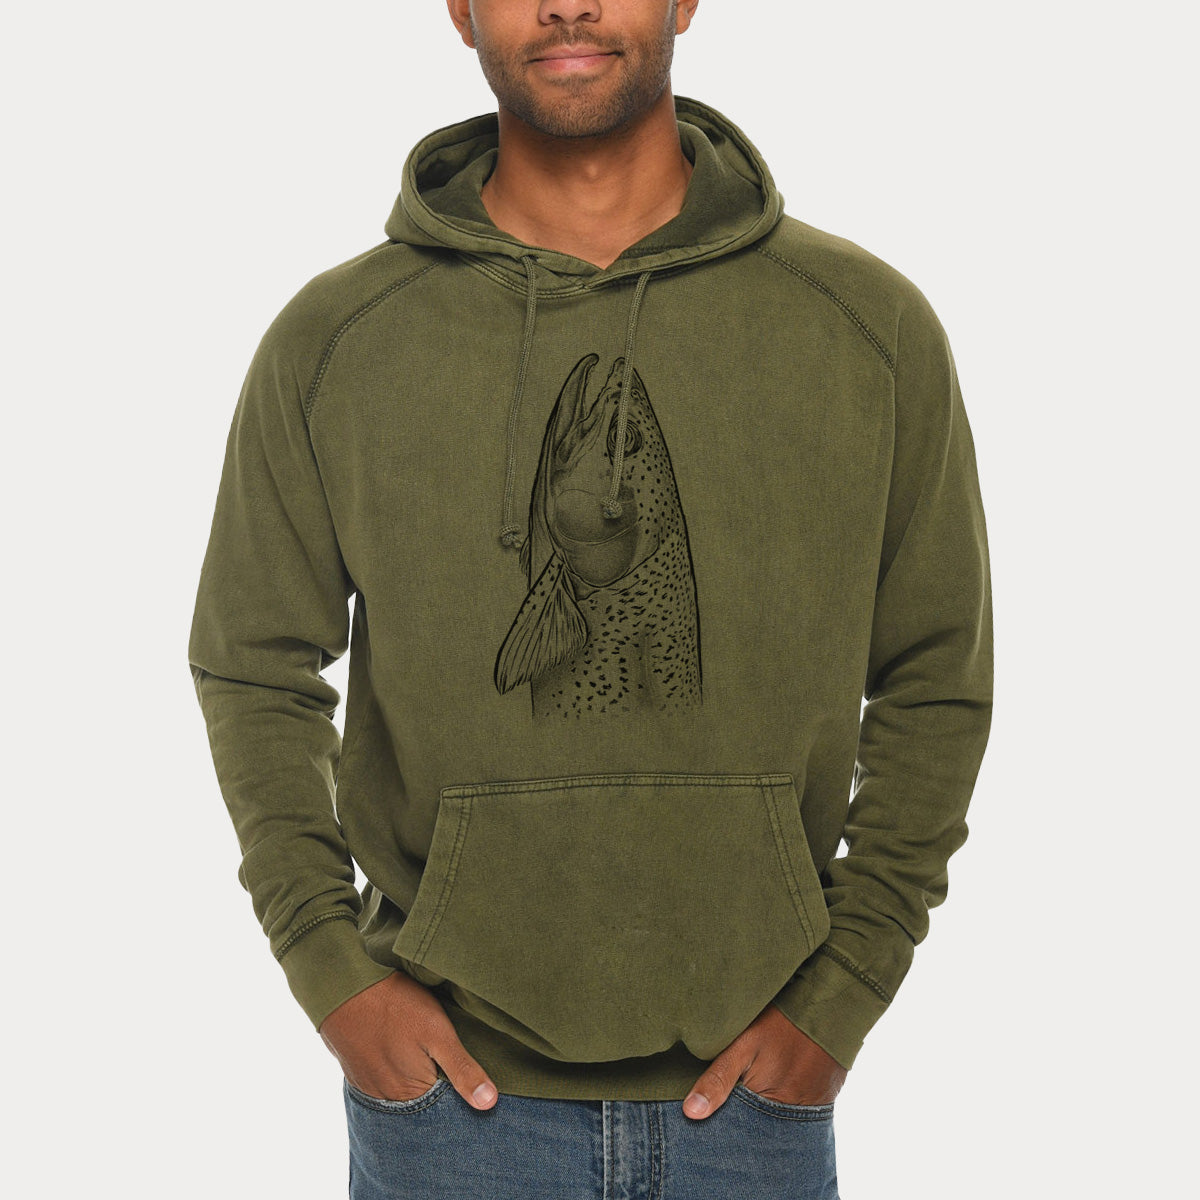 Rainbow Trout - Oncorhynchus mykiss  - Mid-Weight Unisex Vintage 100% Cotton Hoodie